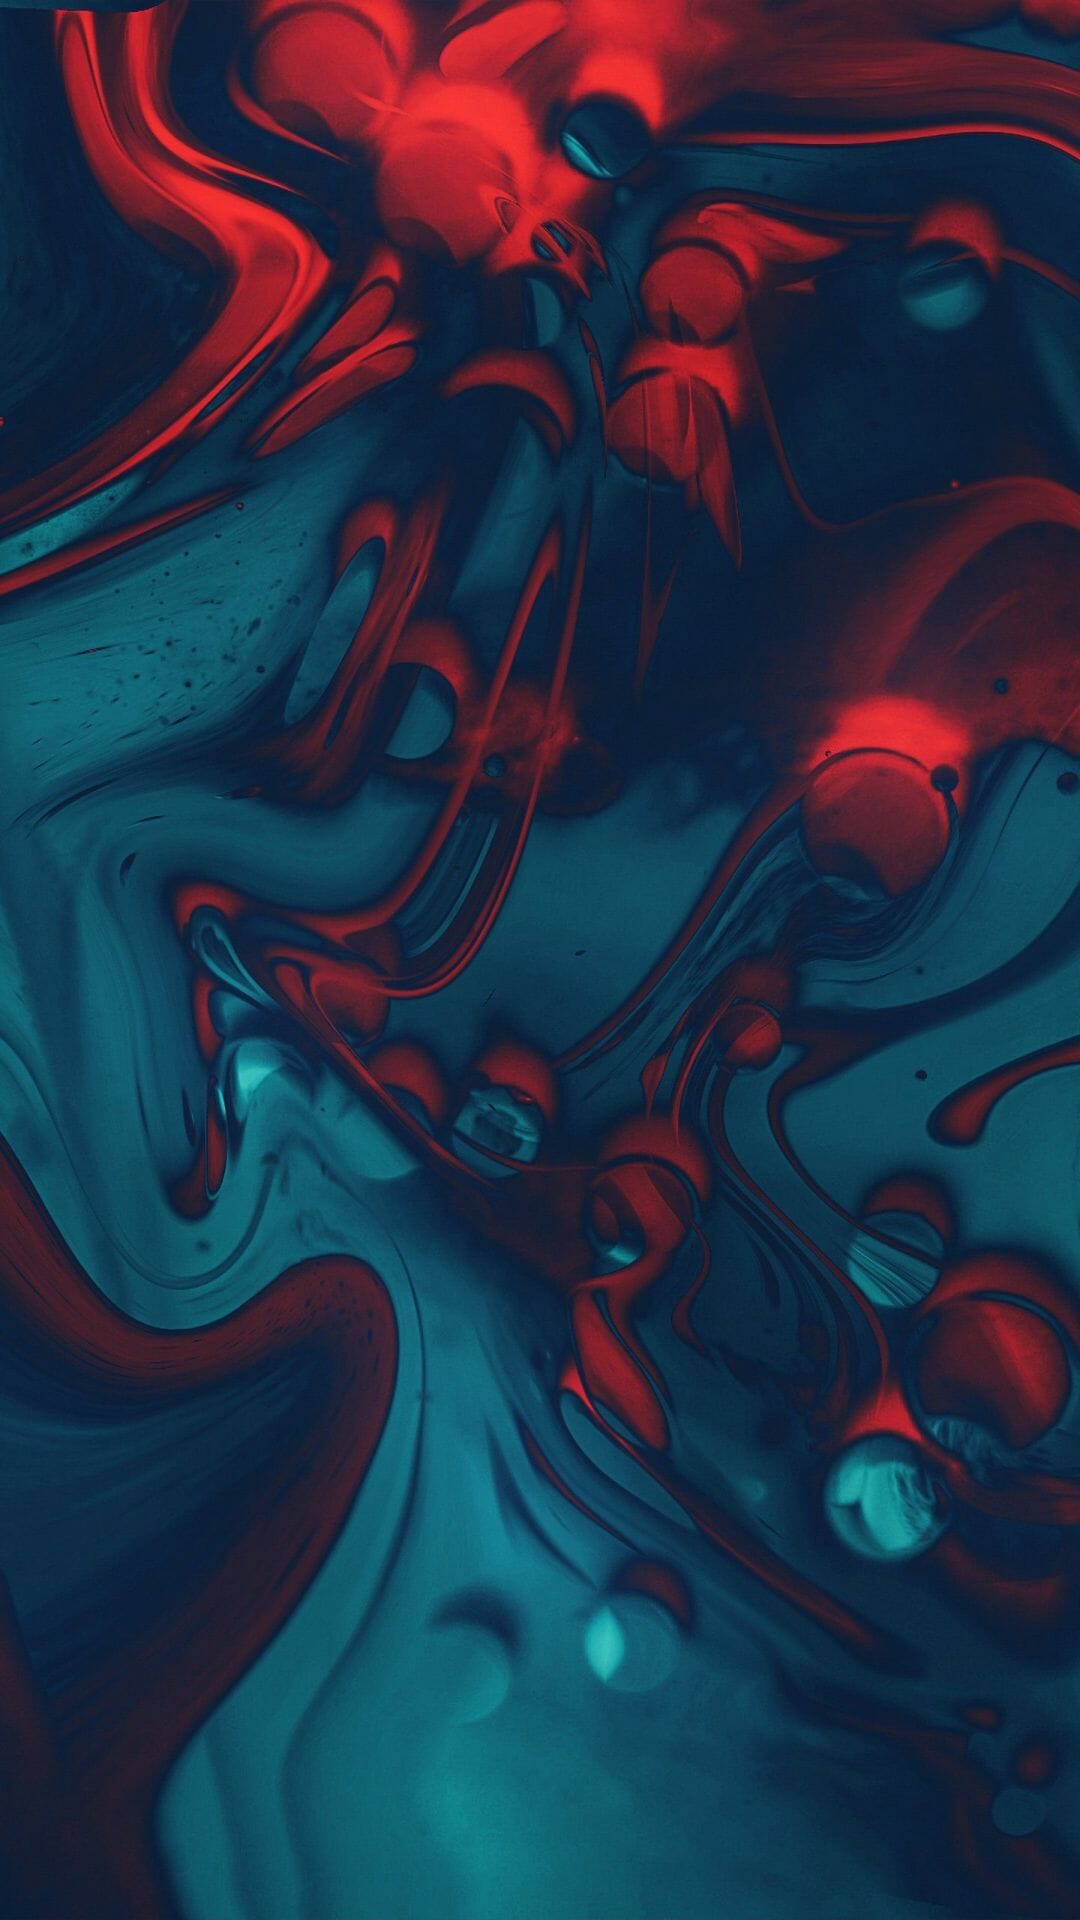 Red Blue Abstract. Aesthetic Wallpaper In 2019. Abstract / iPhone HD Wallpaper Background Download HD Wallpaper (Desktop Background / Android / iPhone) (1080p, 4k) (1080x1920) (2022)